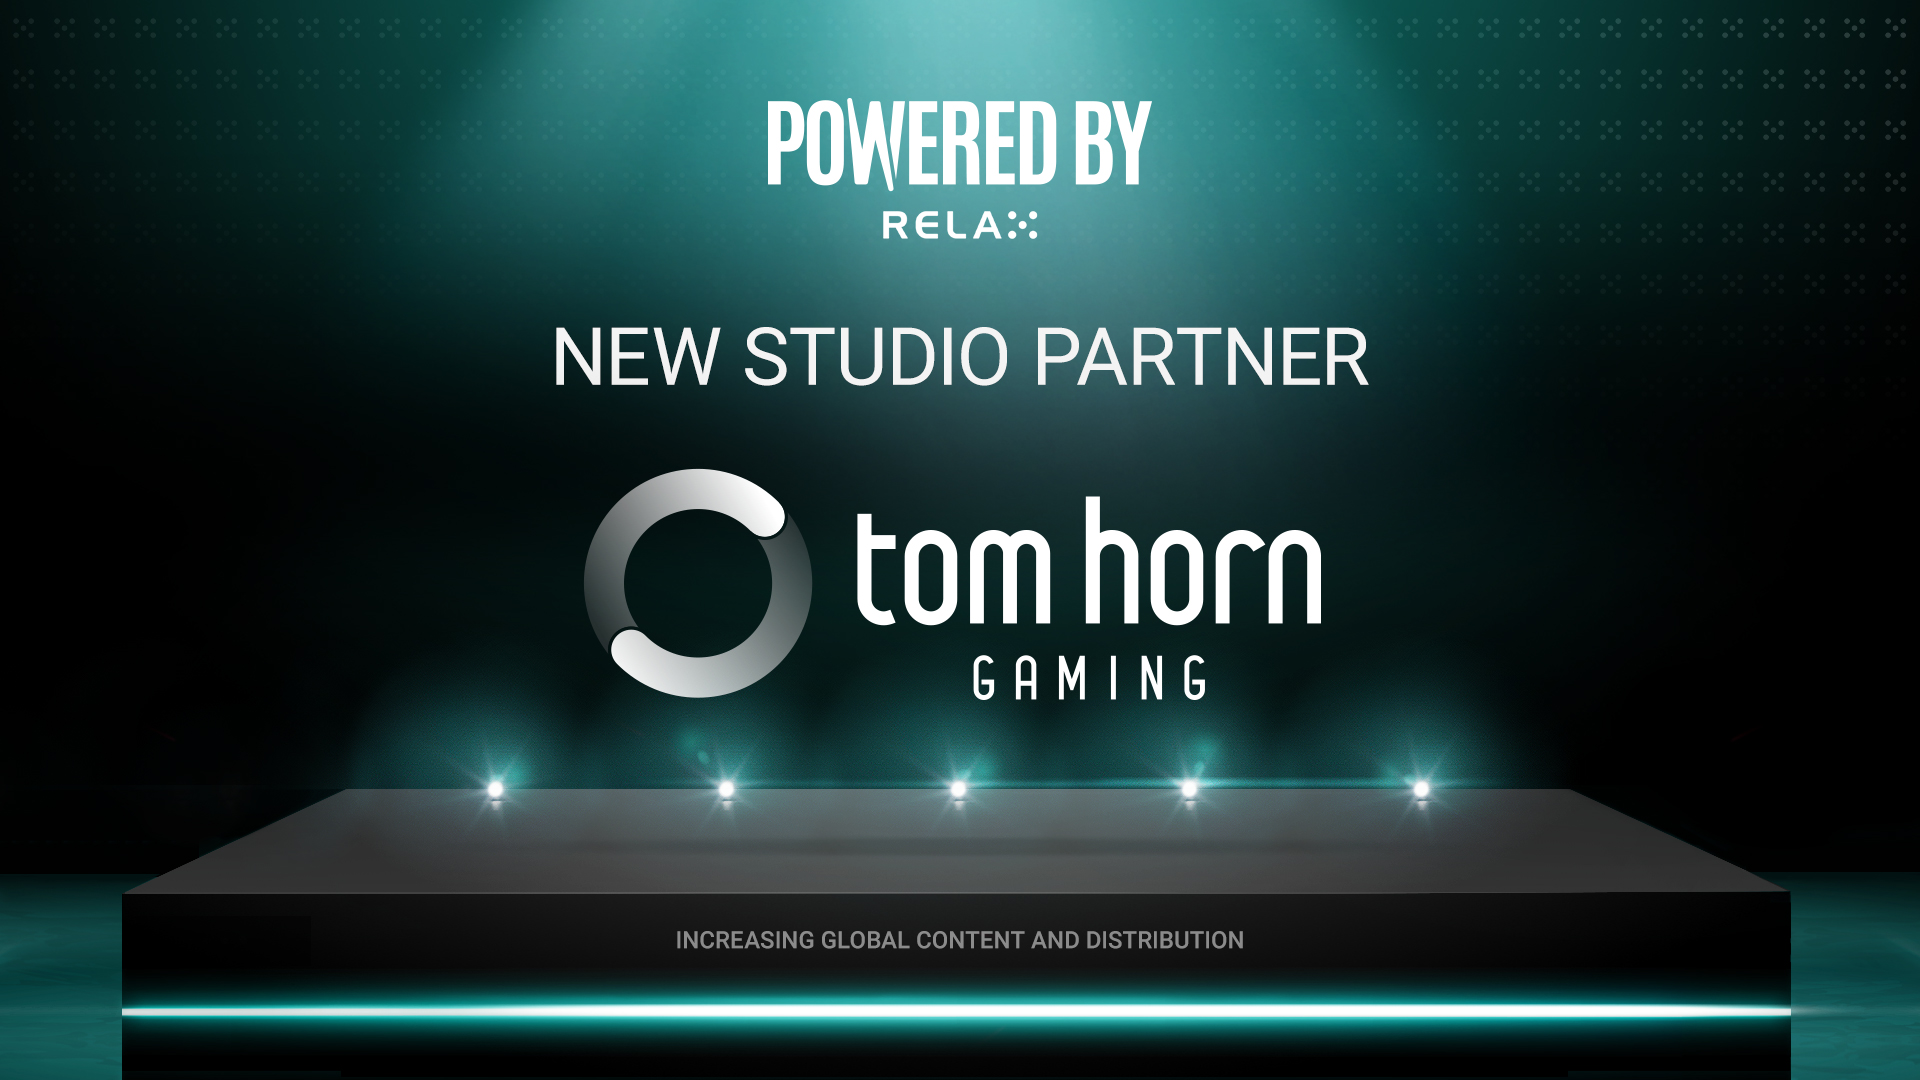 Relax Gaming partners with Tom Horn Gaming in Powered By Relax deal